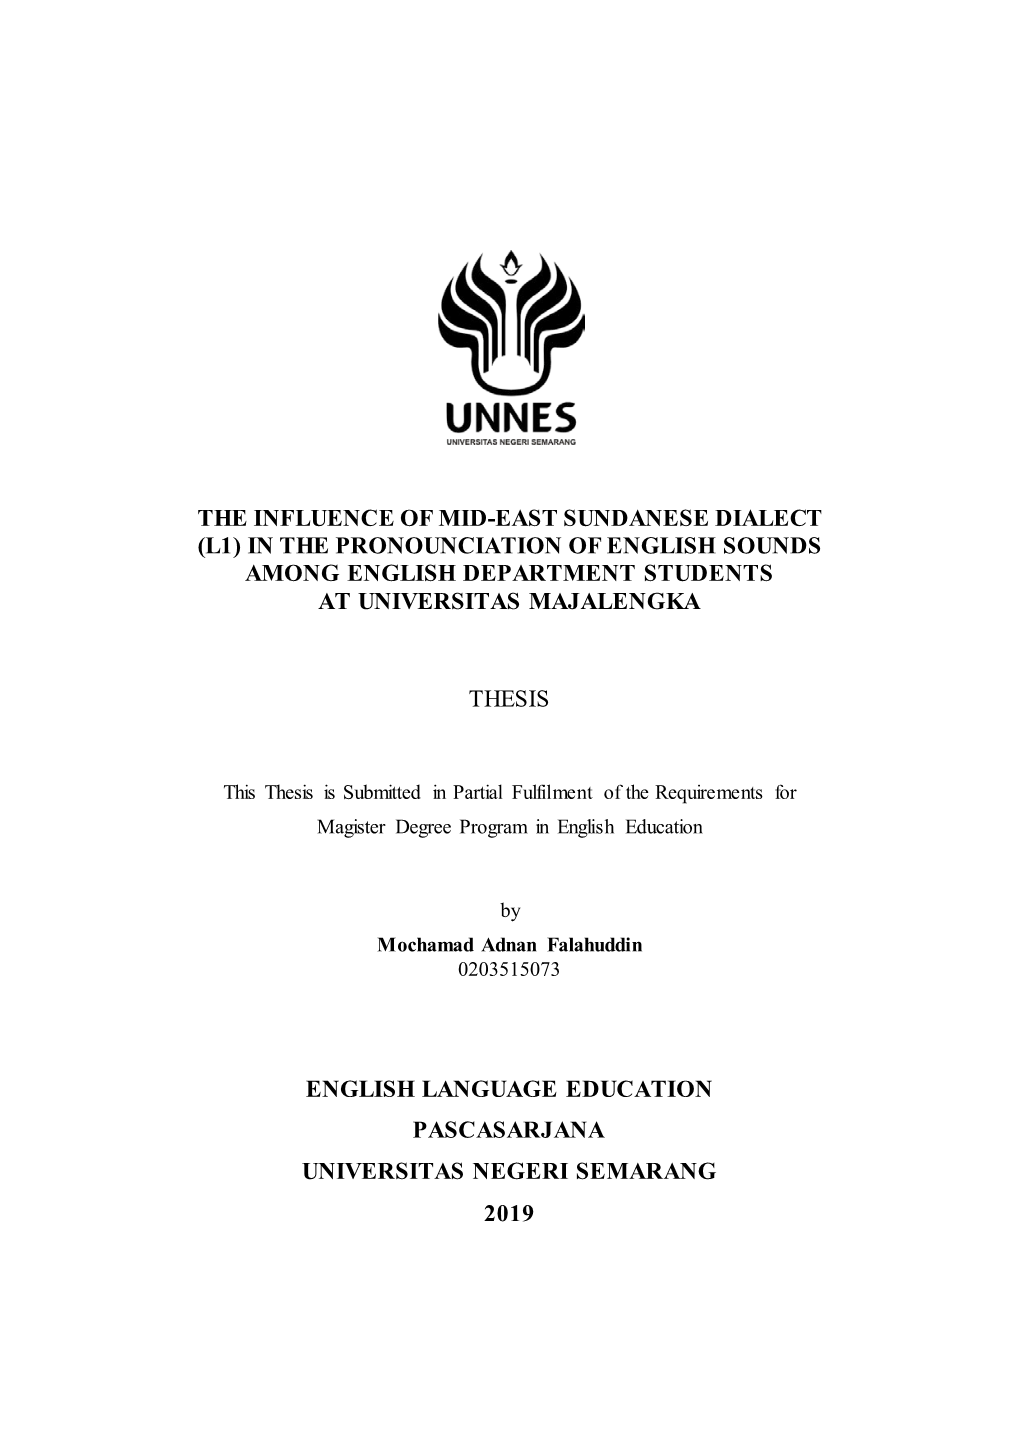 The Influence of Mid-East Sundanese Dialect (L1) in the Pronounciation of English Sounds Among English Department Students at Universitas Majalengka